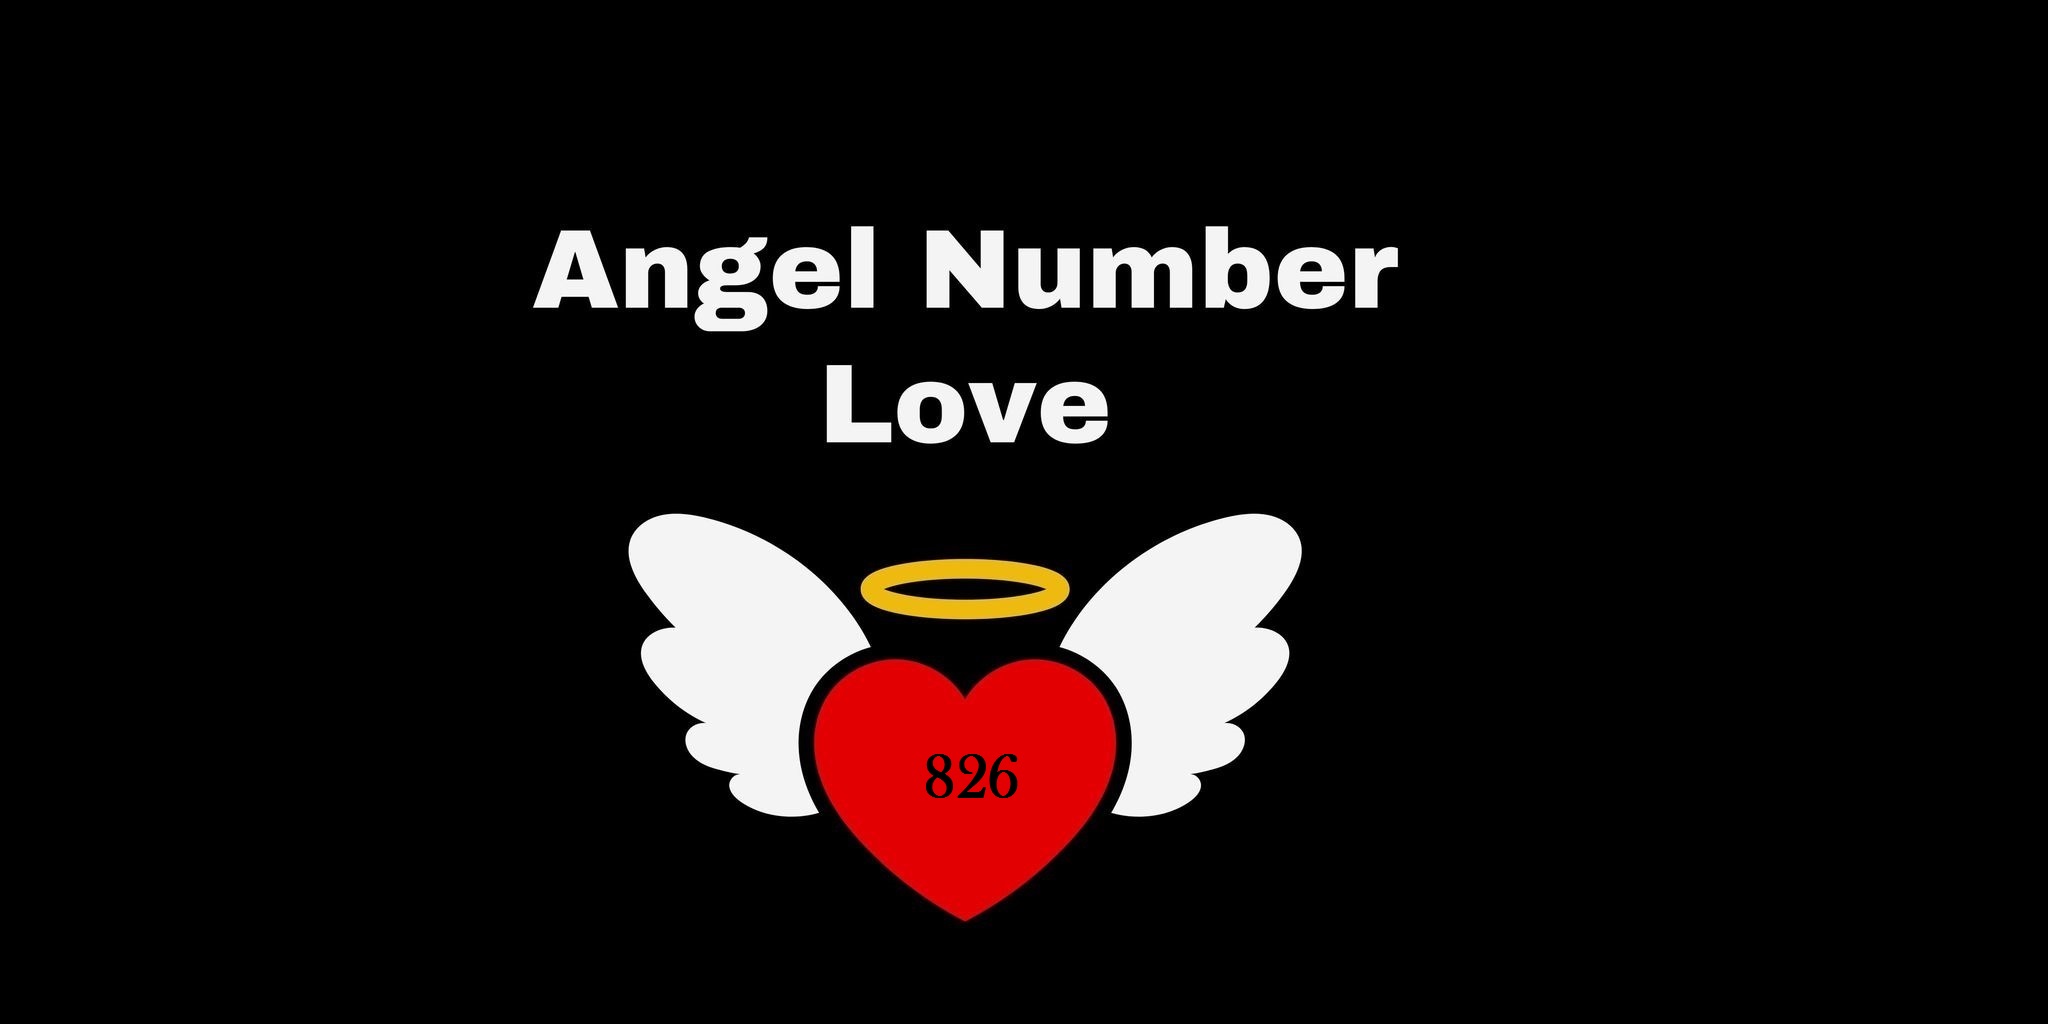 826 Angel Number Meaning In Love